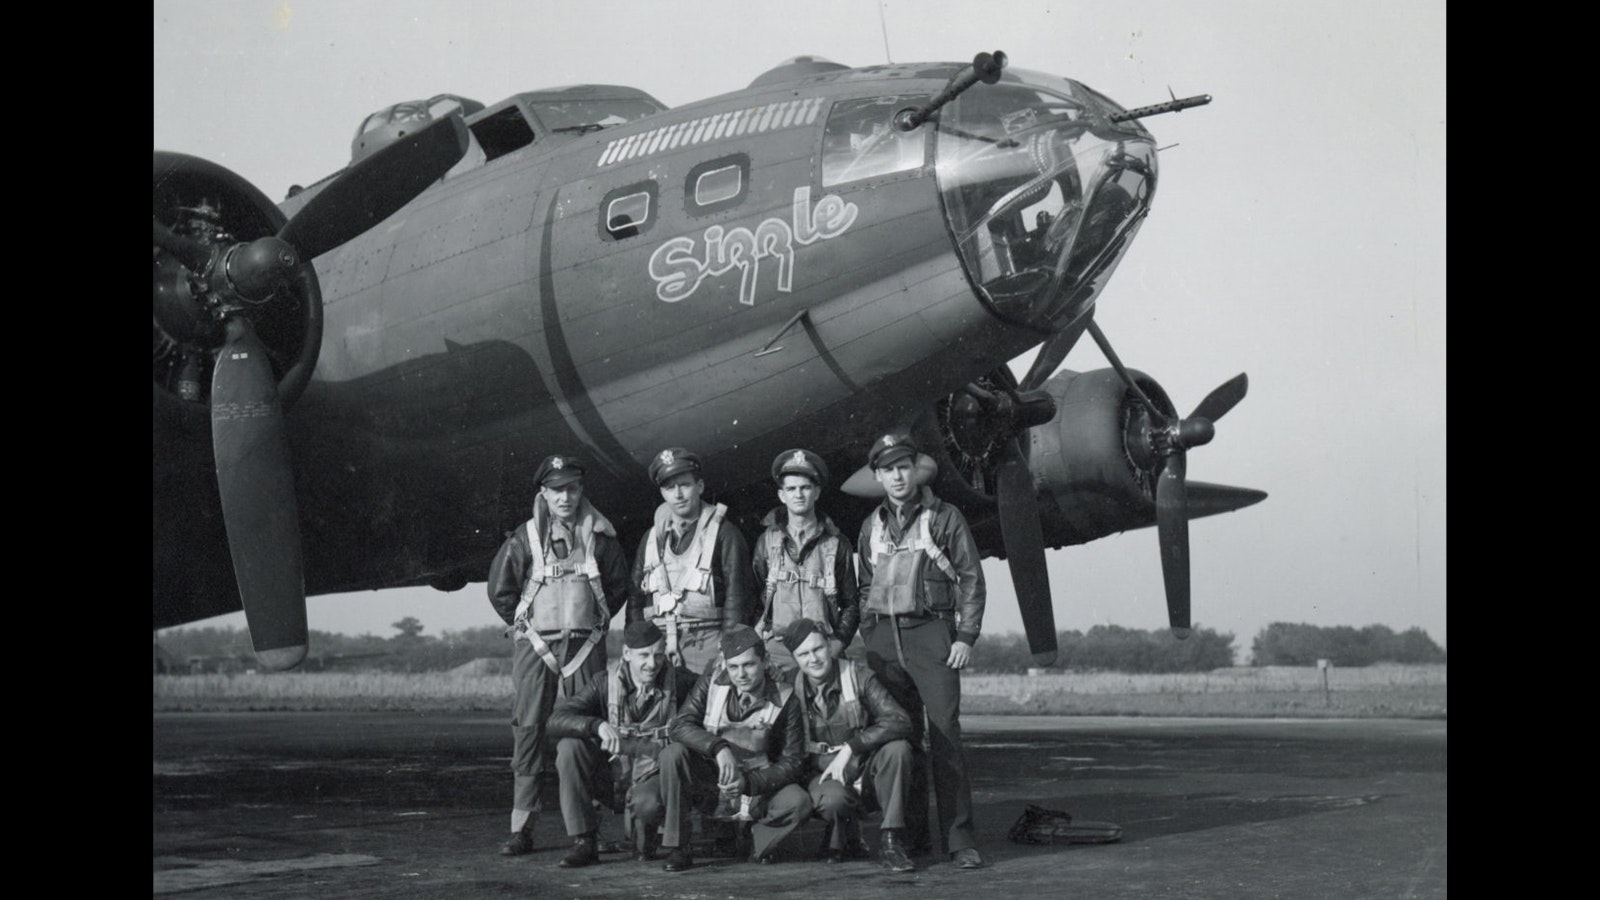 Members of the B-17 “Sizzle” crew pose with their bomber. Pilot Bill Hines is standing at right.